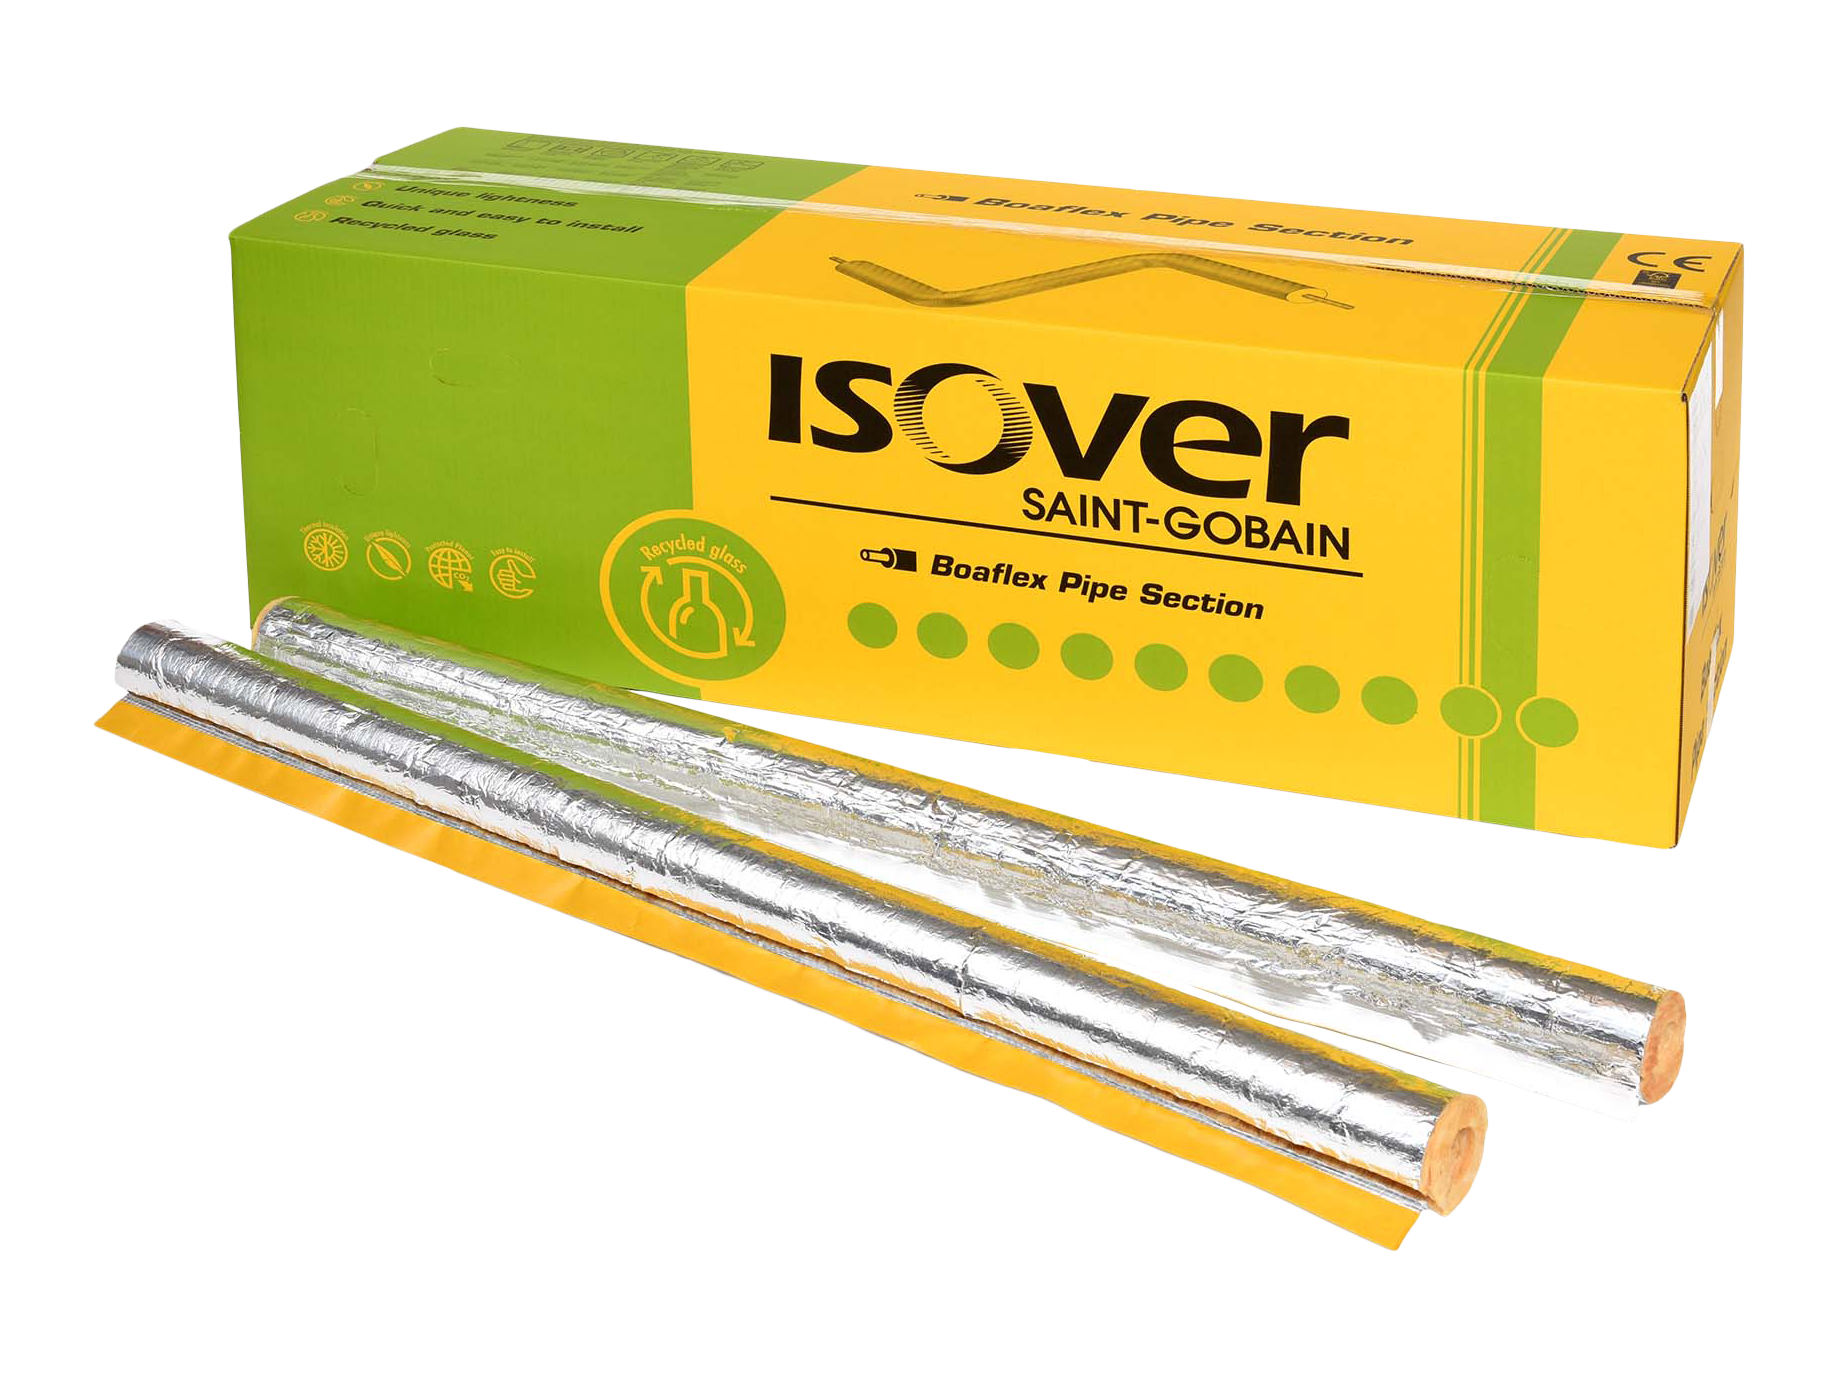 ISOVER Boaflex Pipe Section 48/60